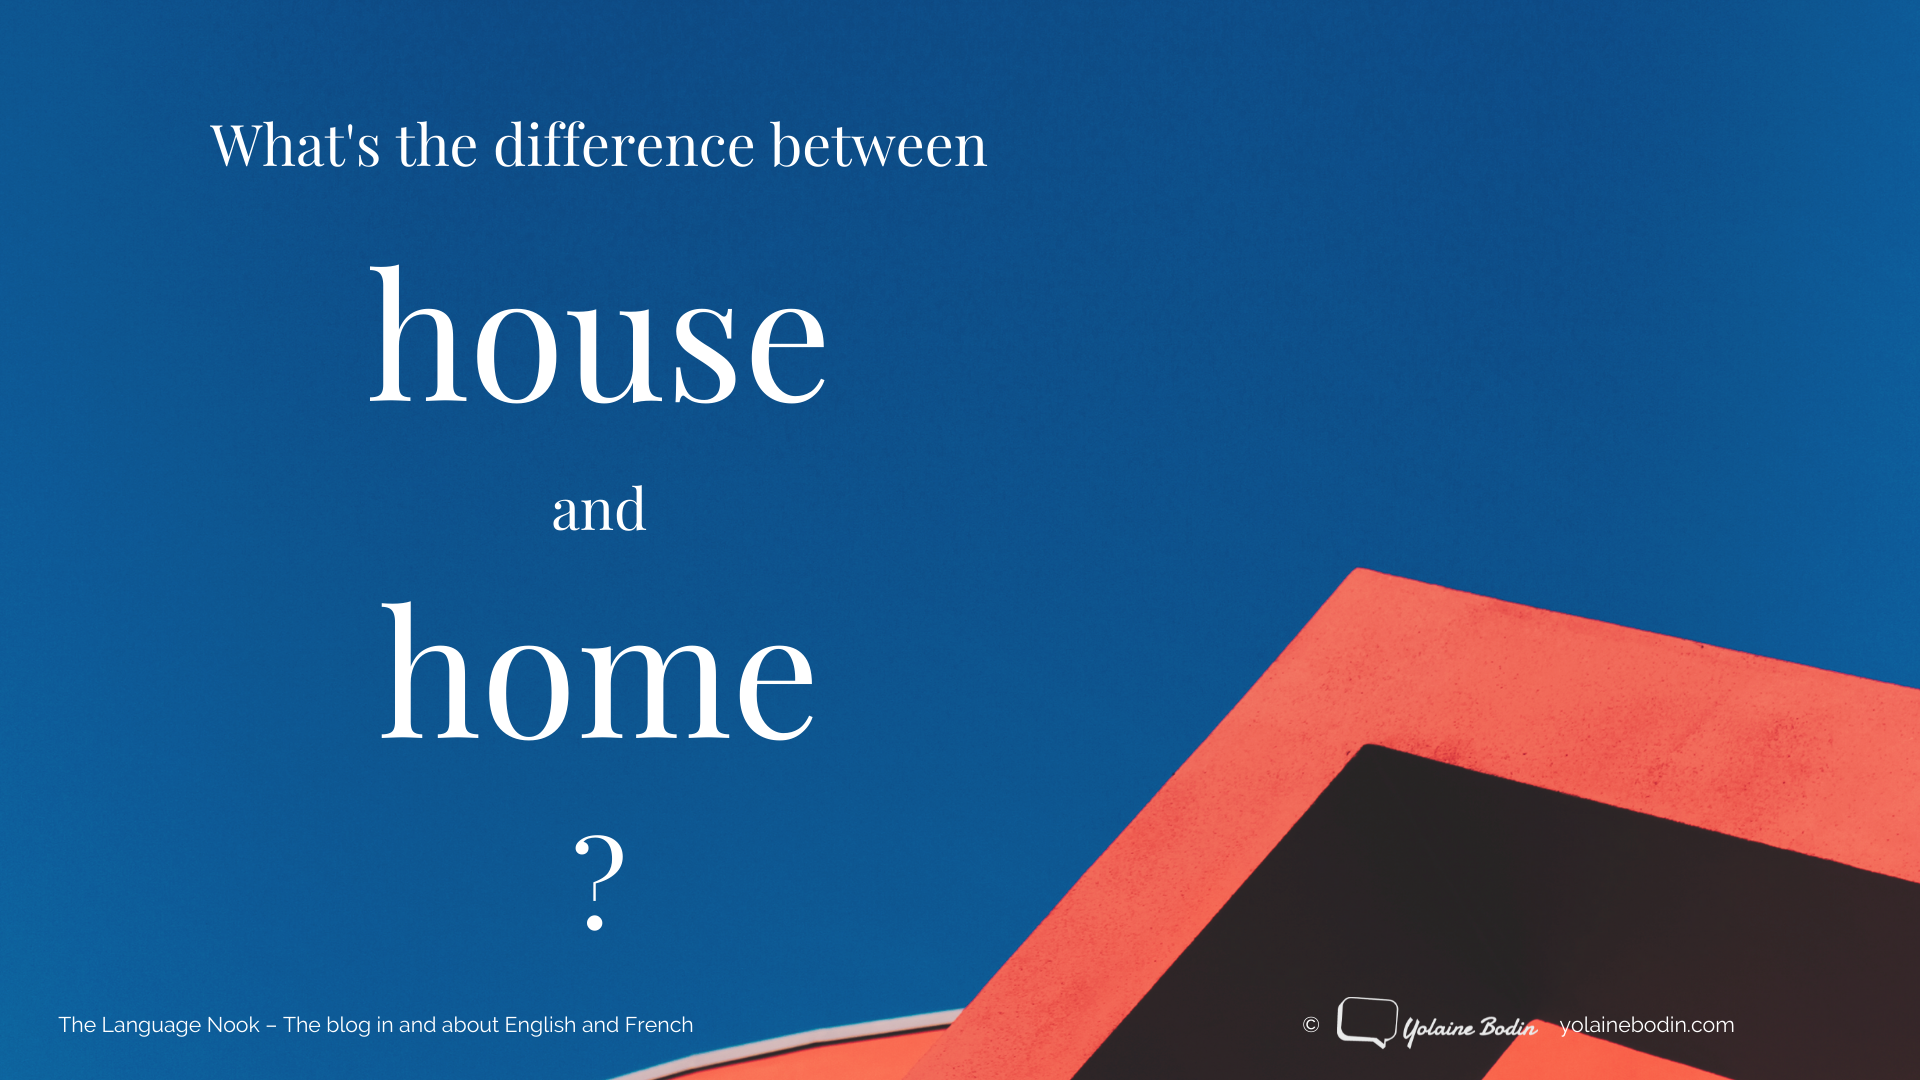 blog post illustration about house or home for Yolaine Bodin's the Language Nook